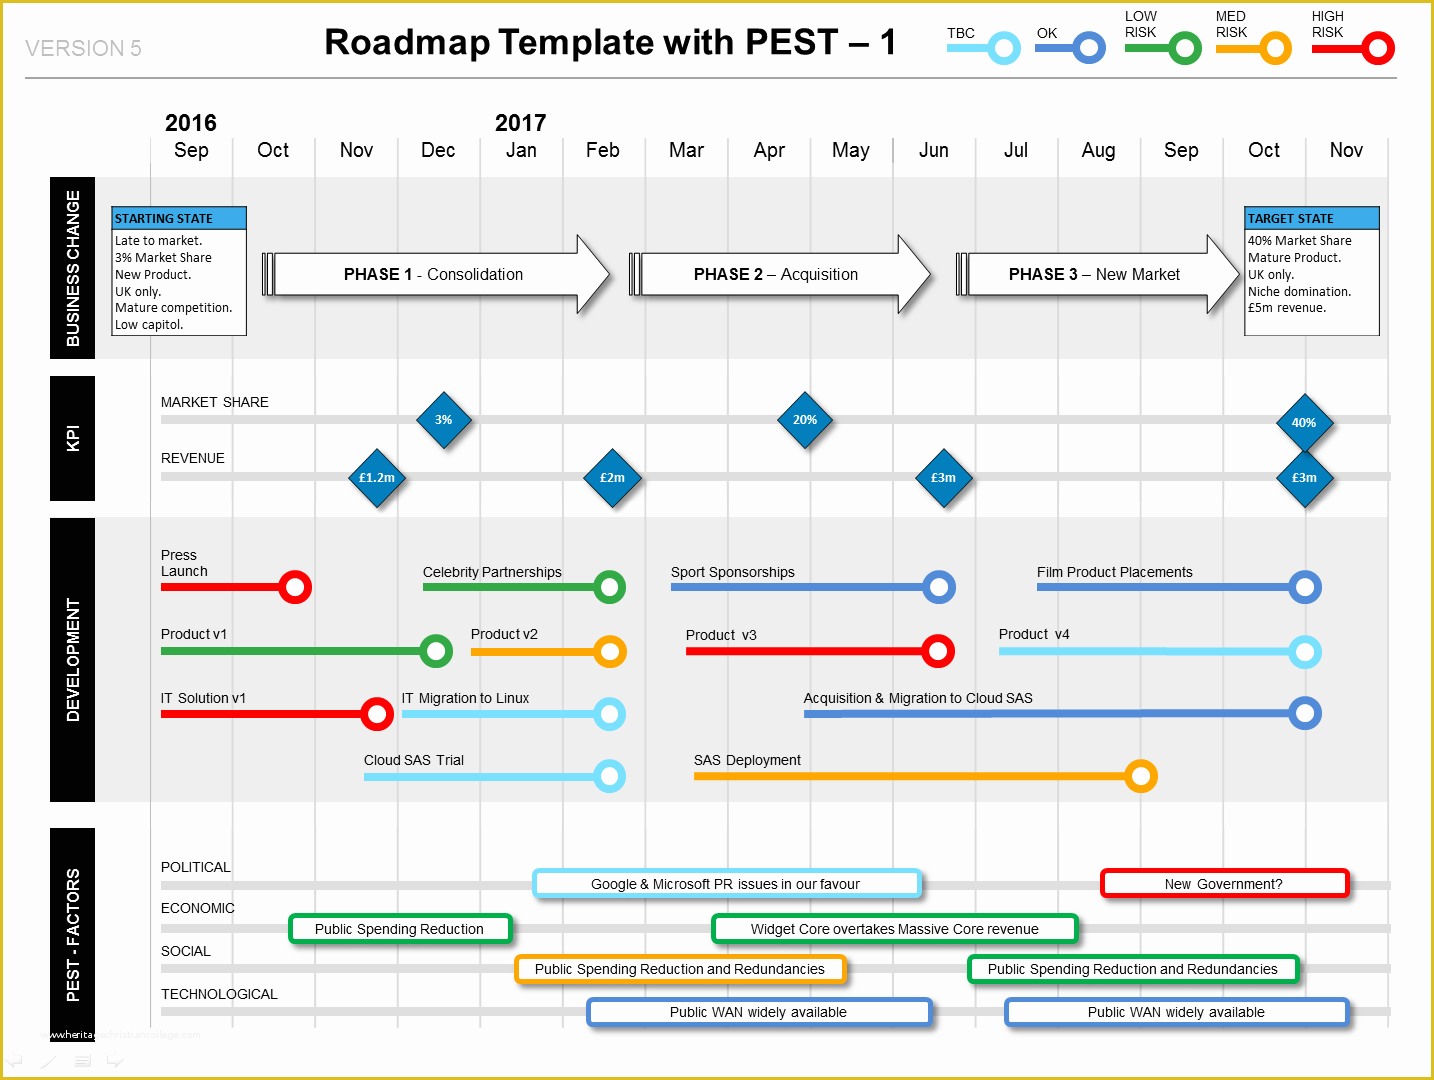 Free Roadmap Template Powerpoint Of Roadmap with Pest Factors Phases Kpis & Milestones Ppt